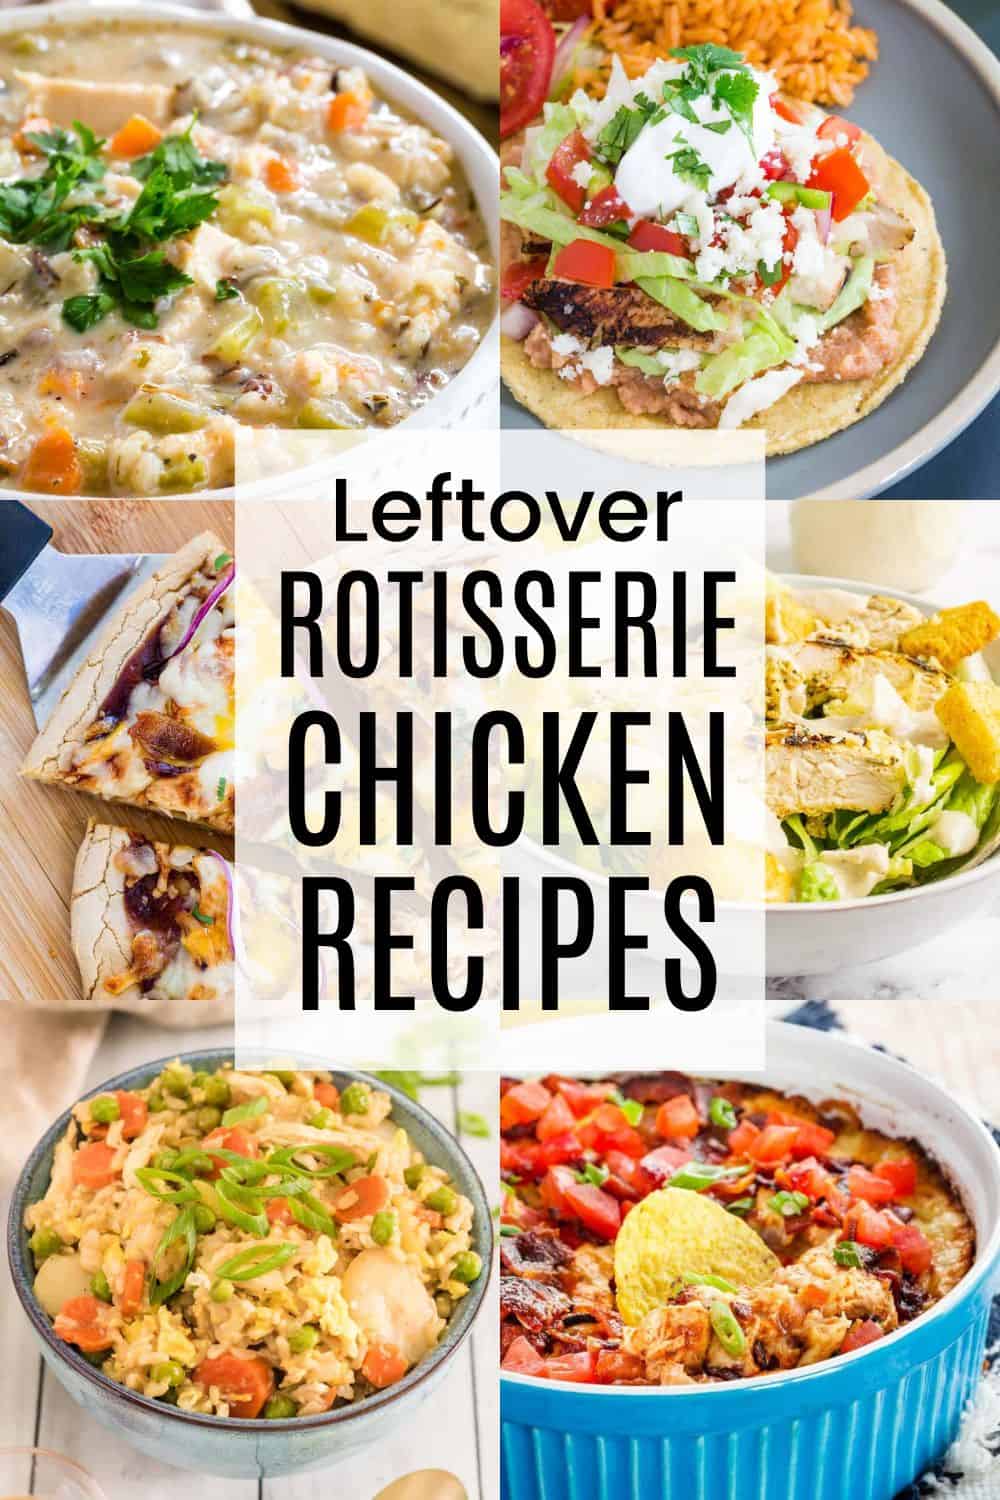 A two-by-three collage of recipes made with leftover rotisserie chicken including tostadas, soup, chicken salad, and fried rice with a translucent white box in the middle with text overlay that says "Leftover Rotisserie Chicken Recipes".